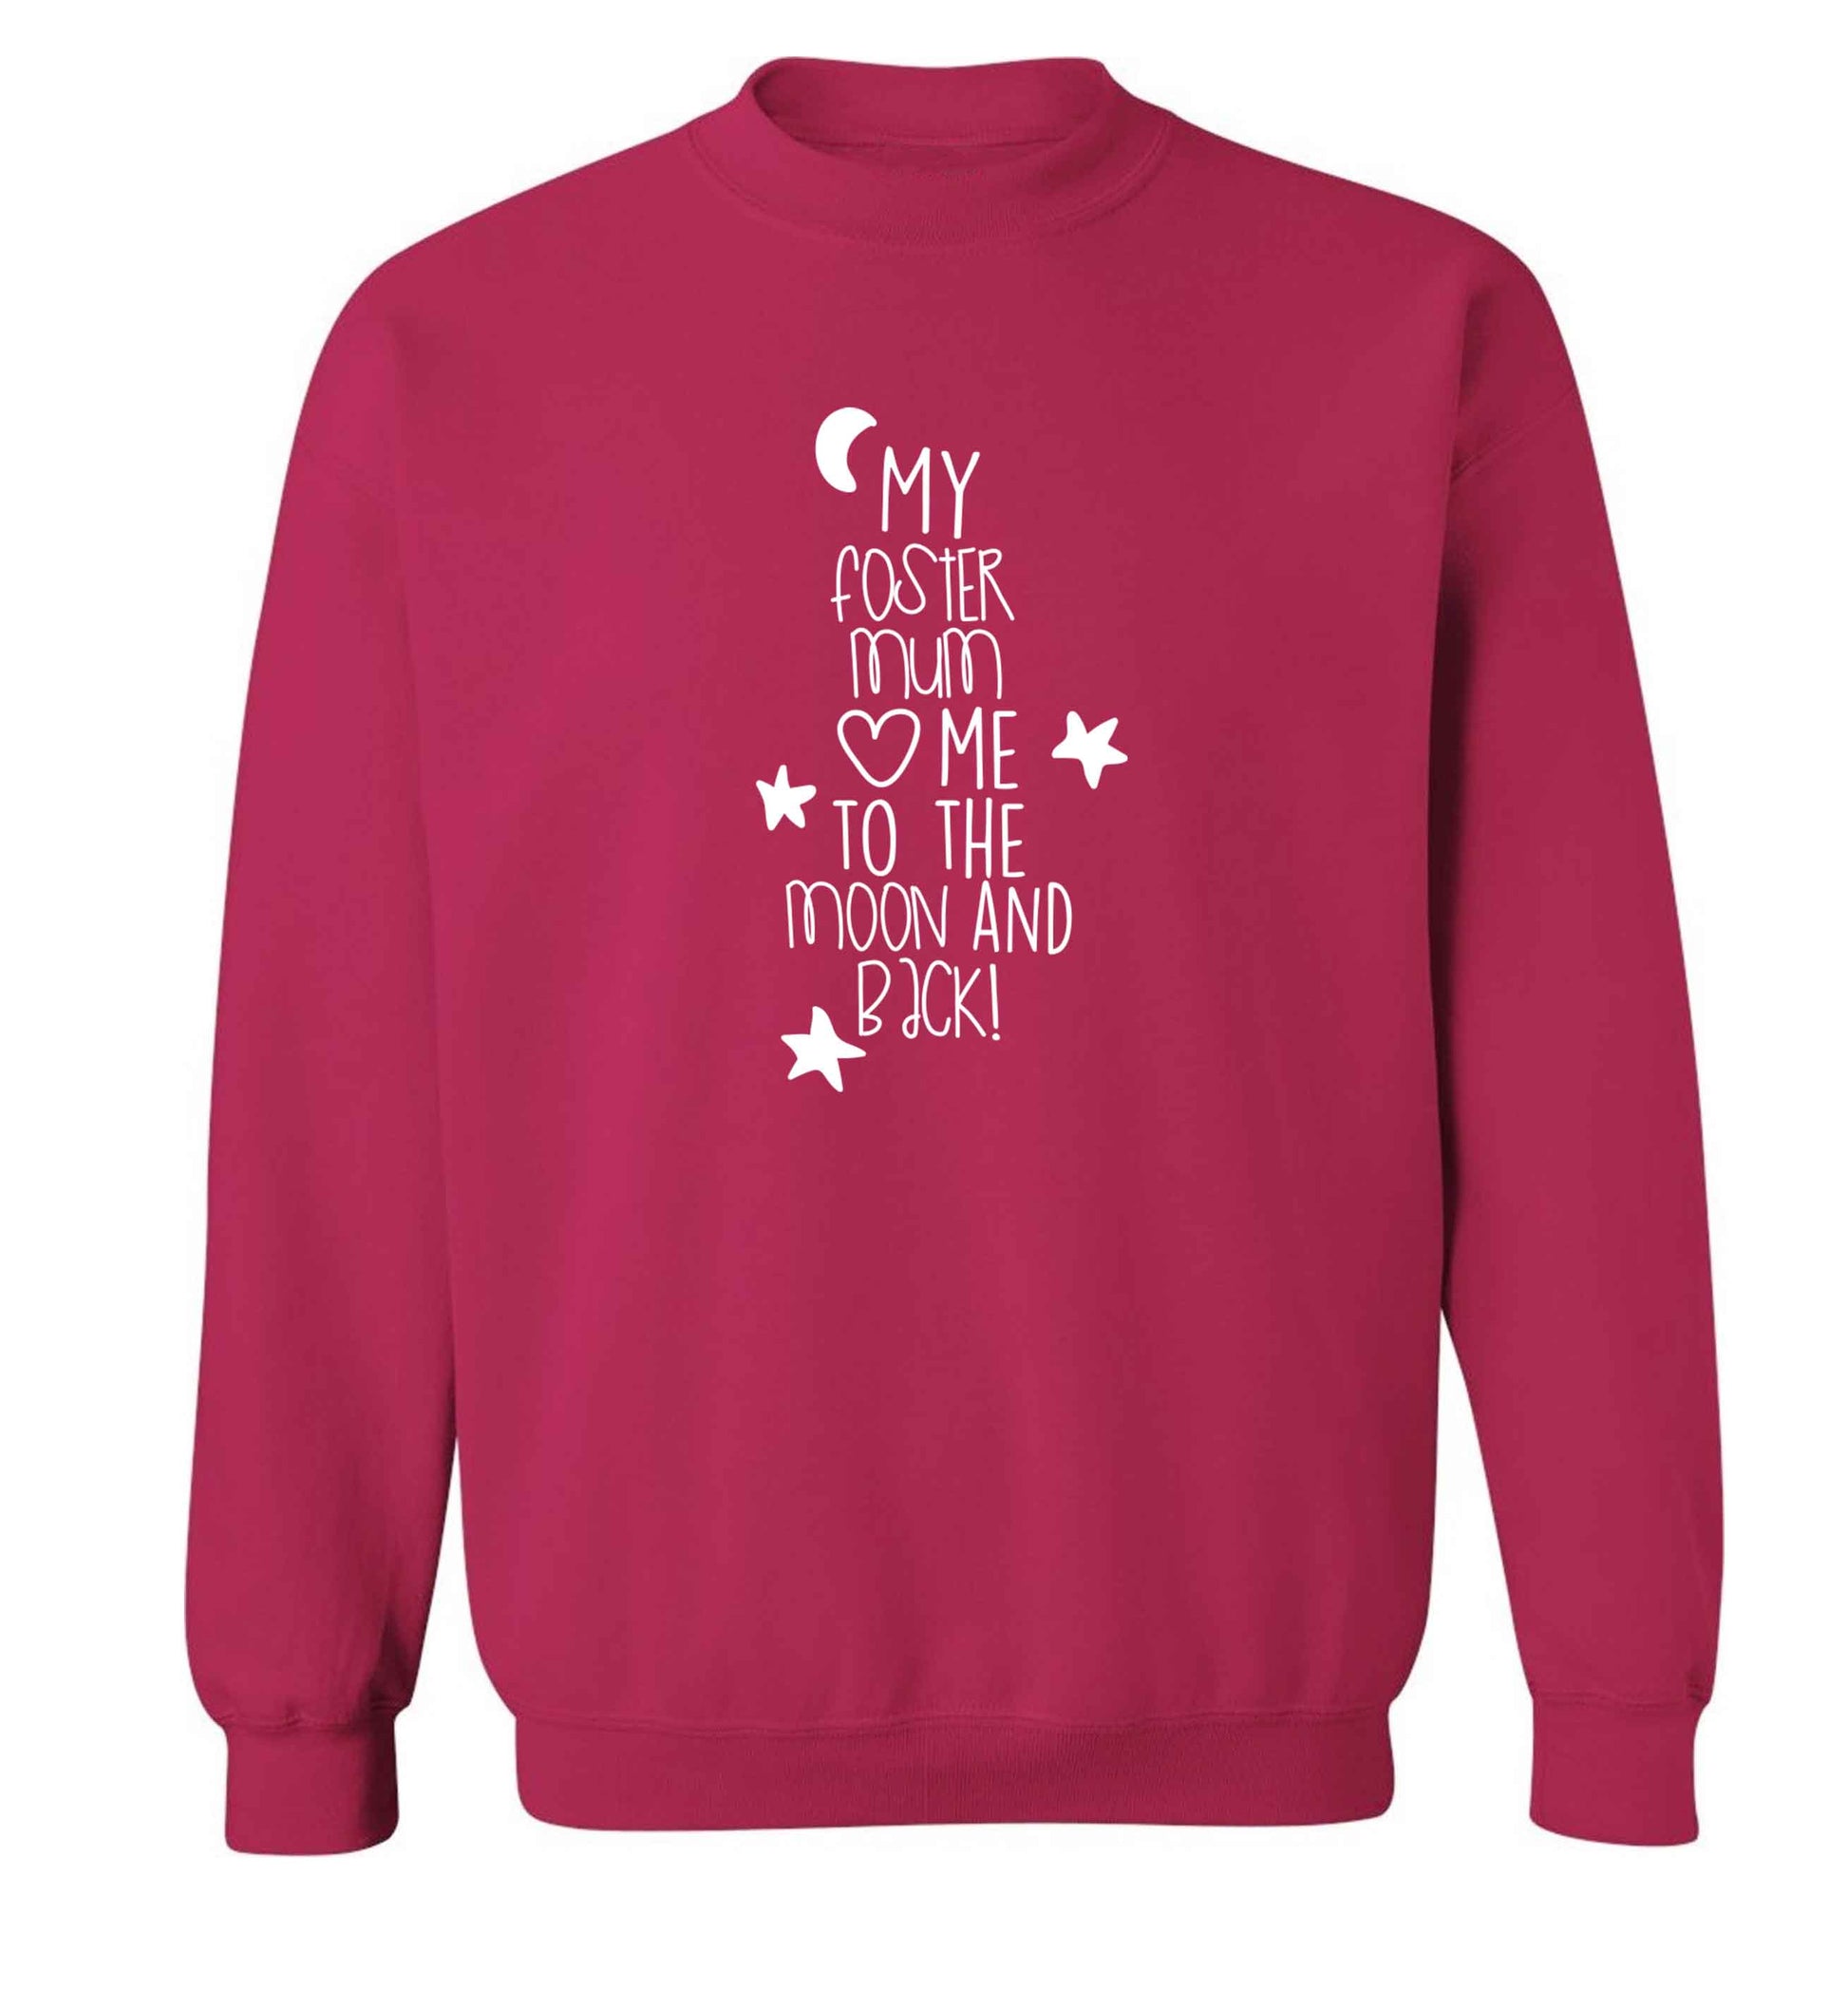 My foster mum loves me to the moon and back adult's unisex pink sweater 2XL